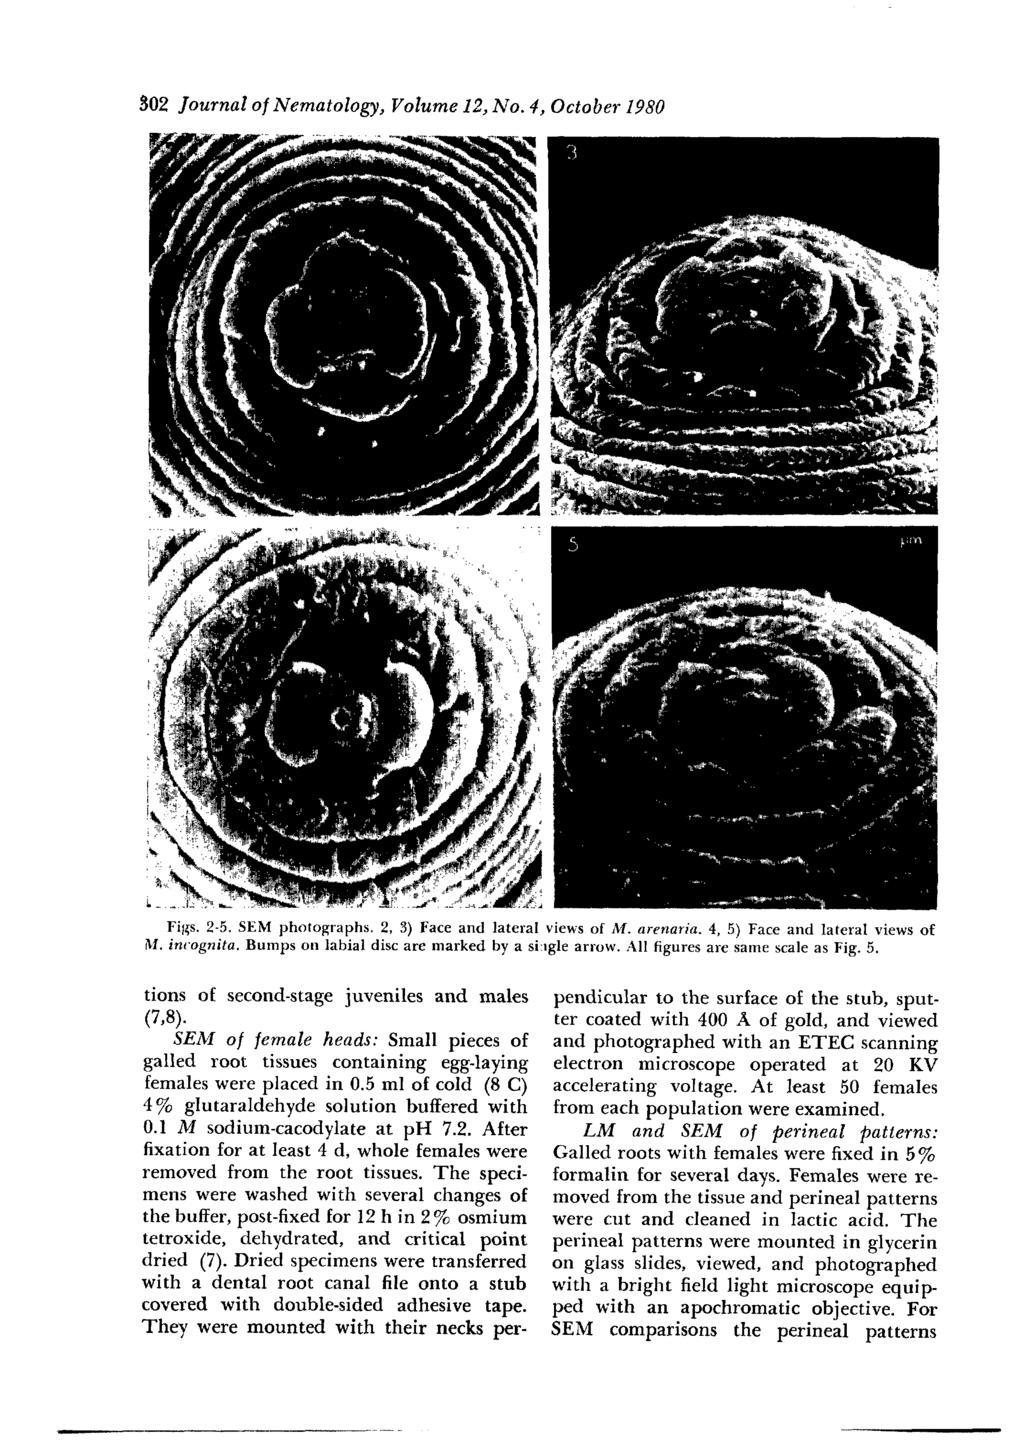 302 Journal of Nematology, Volume 12, No. 4, October 1980 Figs. 2-5. SEM photographs. 2, 3) Face and lateral views of M. arenaria. 4, 5) Face and lateral views of M. incognita.